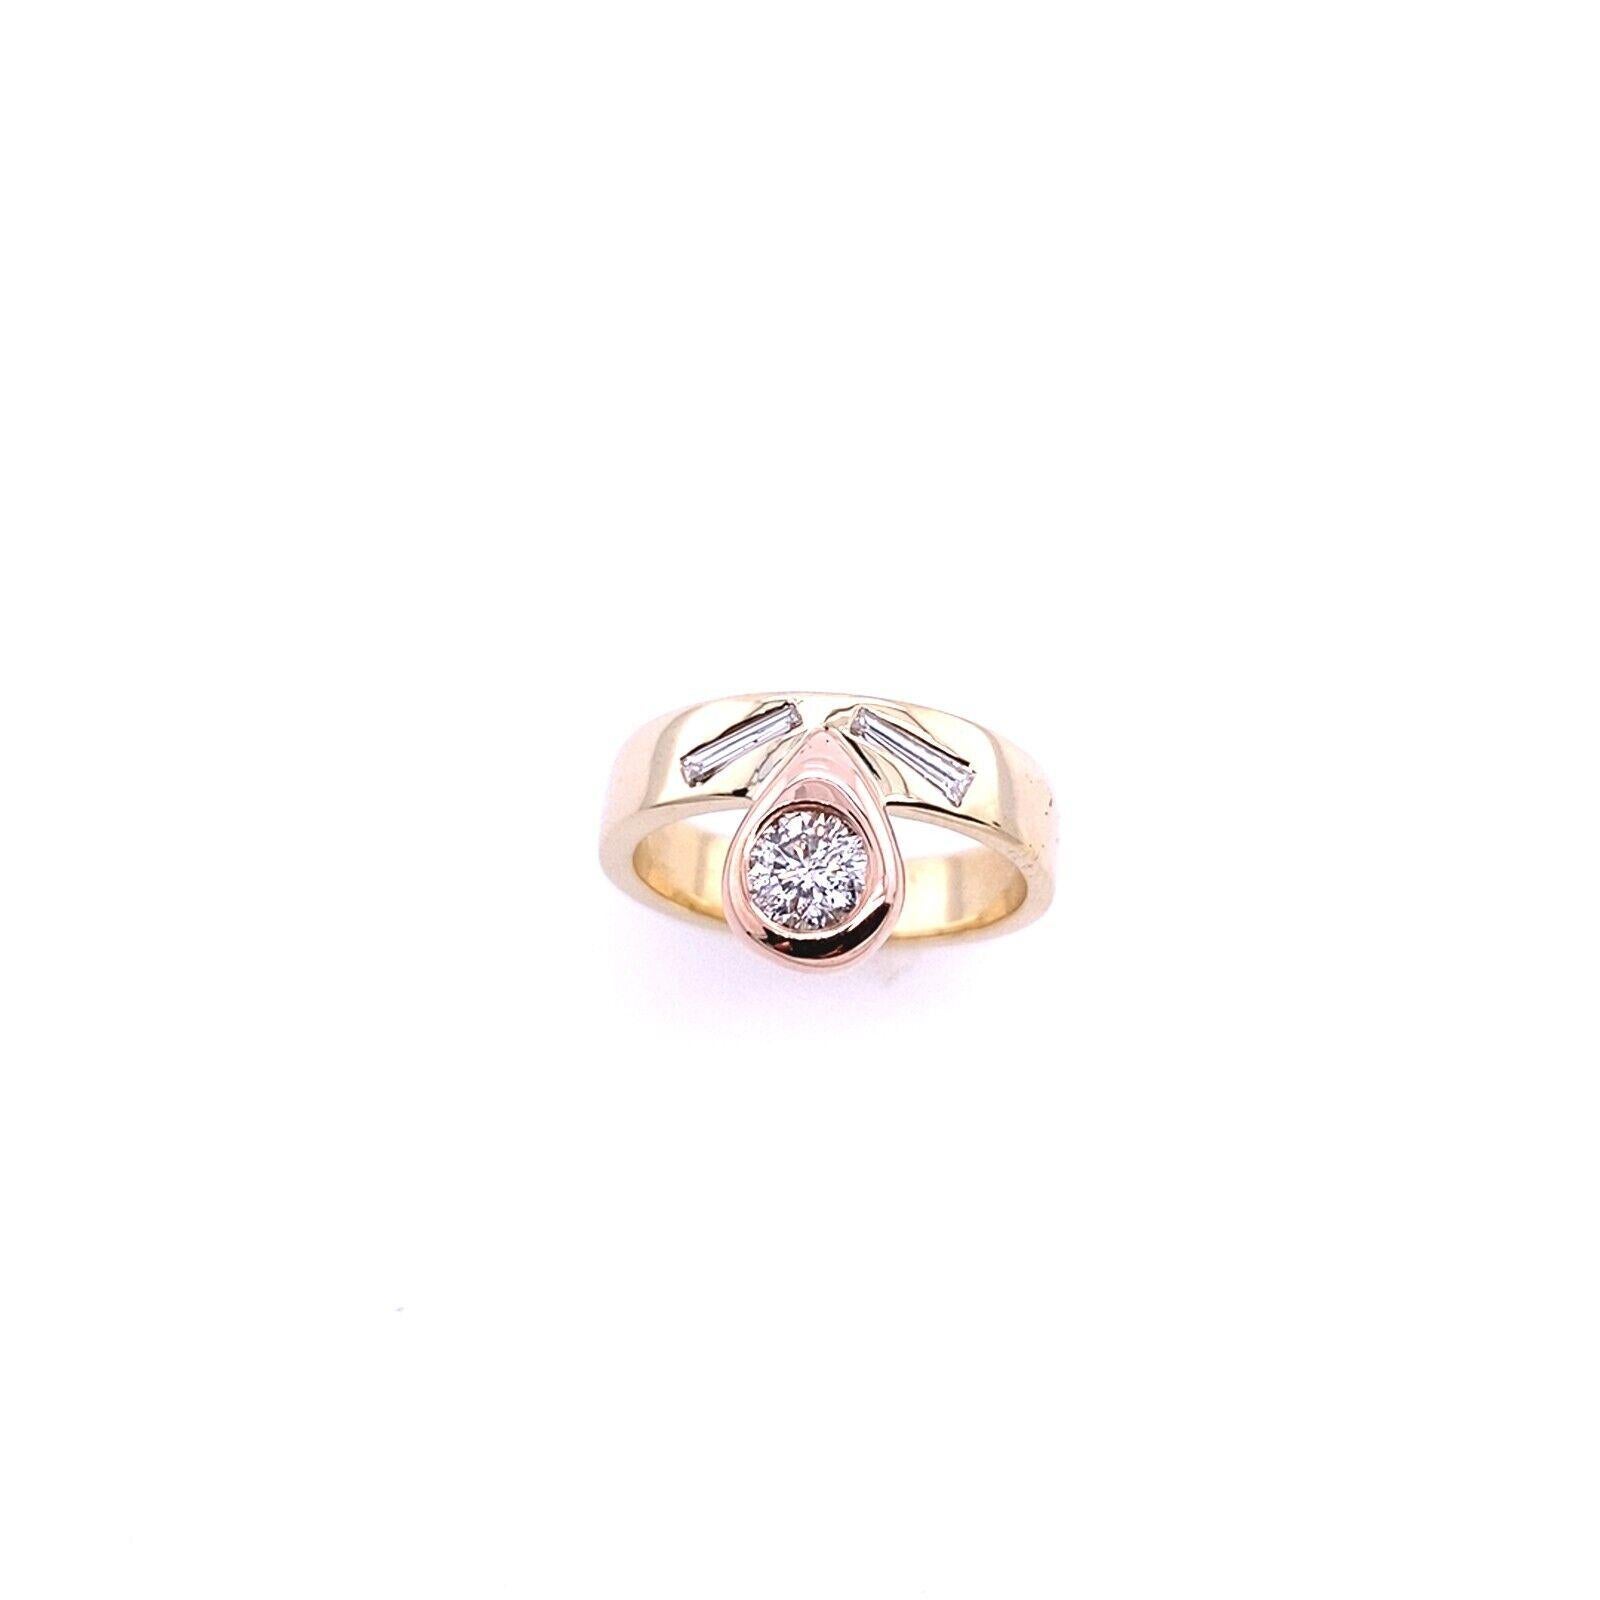 0.50ct G/SI Diamond Set In Rose Gold Pear Drop Setting, In Yellow Gold Band

This delicate Diamond set ring features a Rose Gold band with a Diamond set in a pear drop setting. This ring is set with a 0.50ct Diamond, in Yellow Gold and Rose